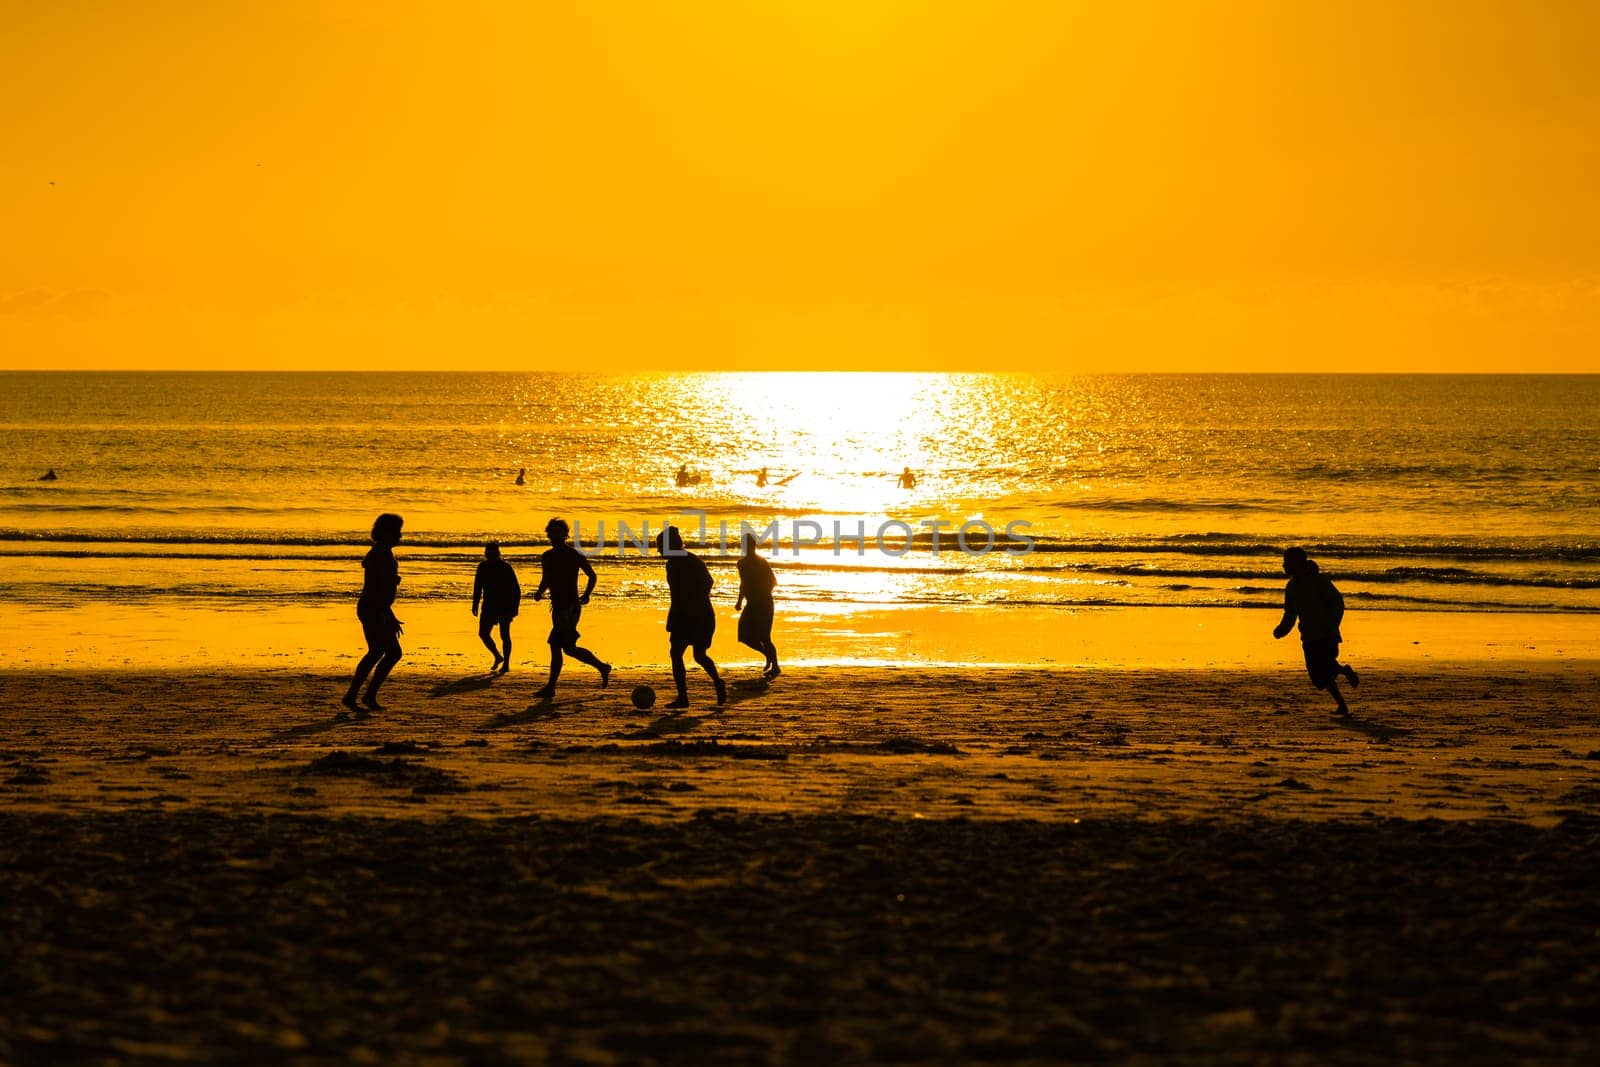 Young People Playing Football on a Beach at Sunset by Studia72